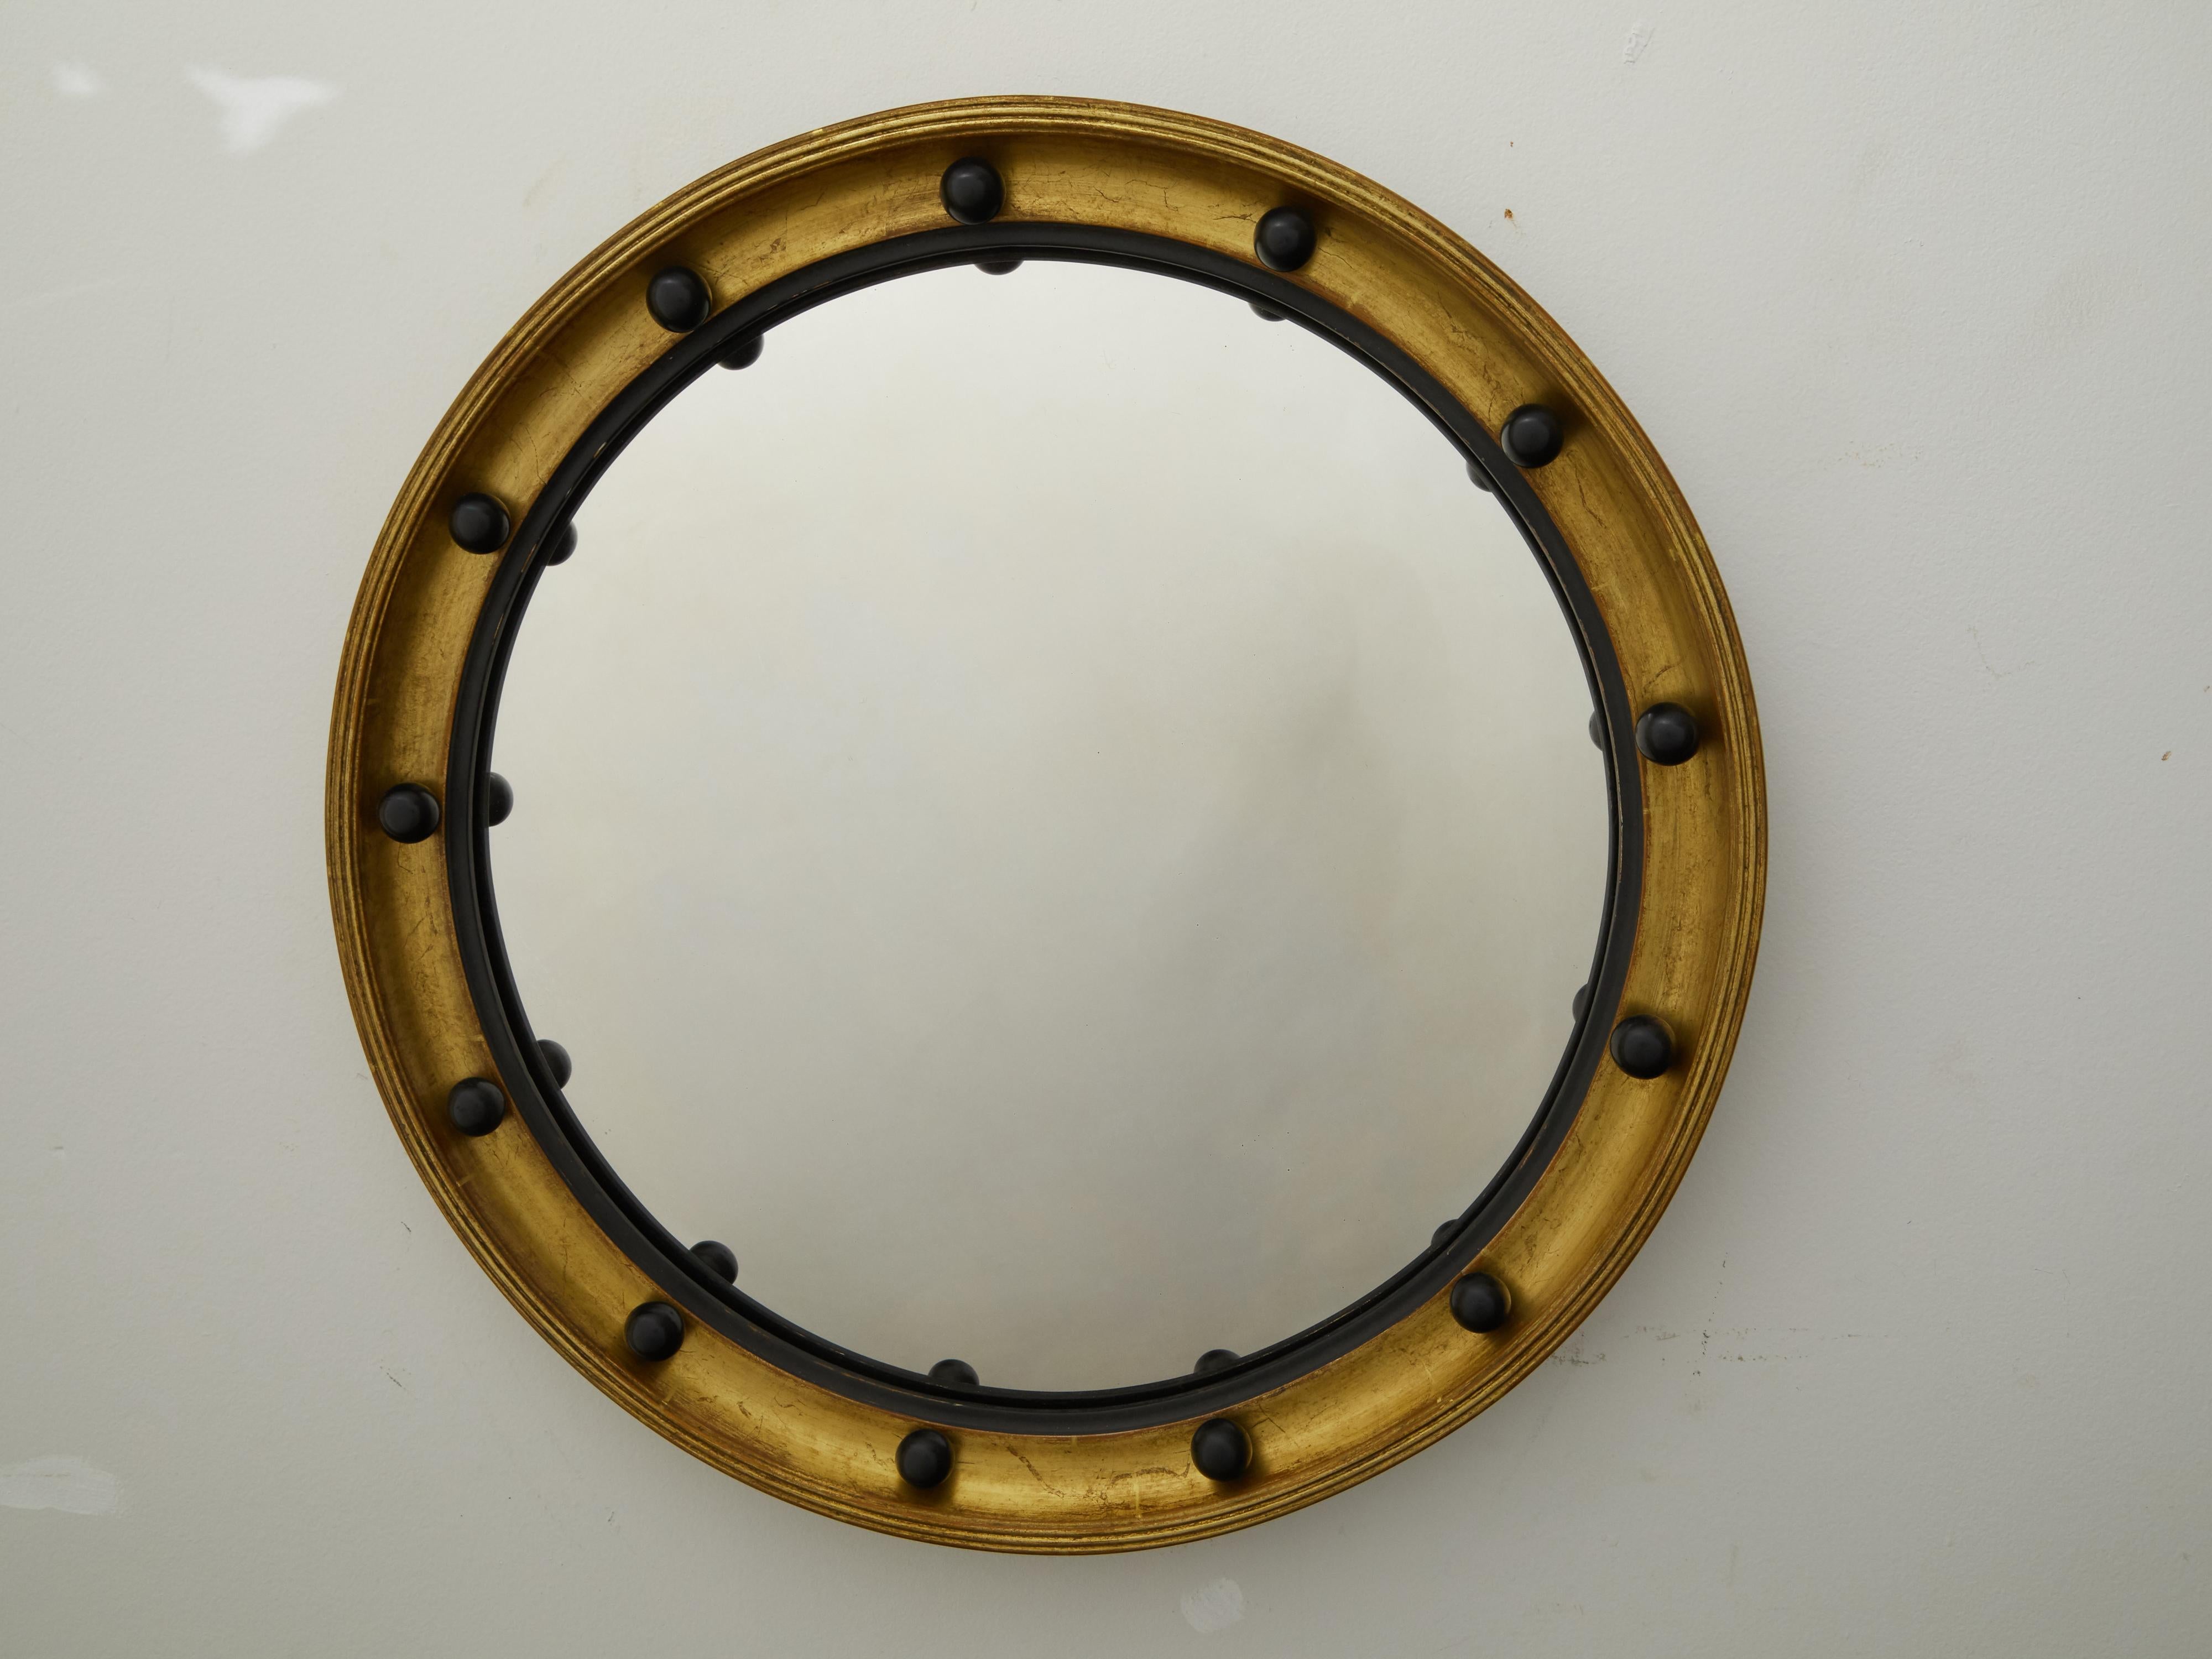 An English giltwood convex bullseye mirror from the early 20th century with dark spheres and inner molding. Created in England during the first quarter of the 20th century, this giltwood girandole mirror features a circular frame accented with